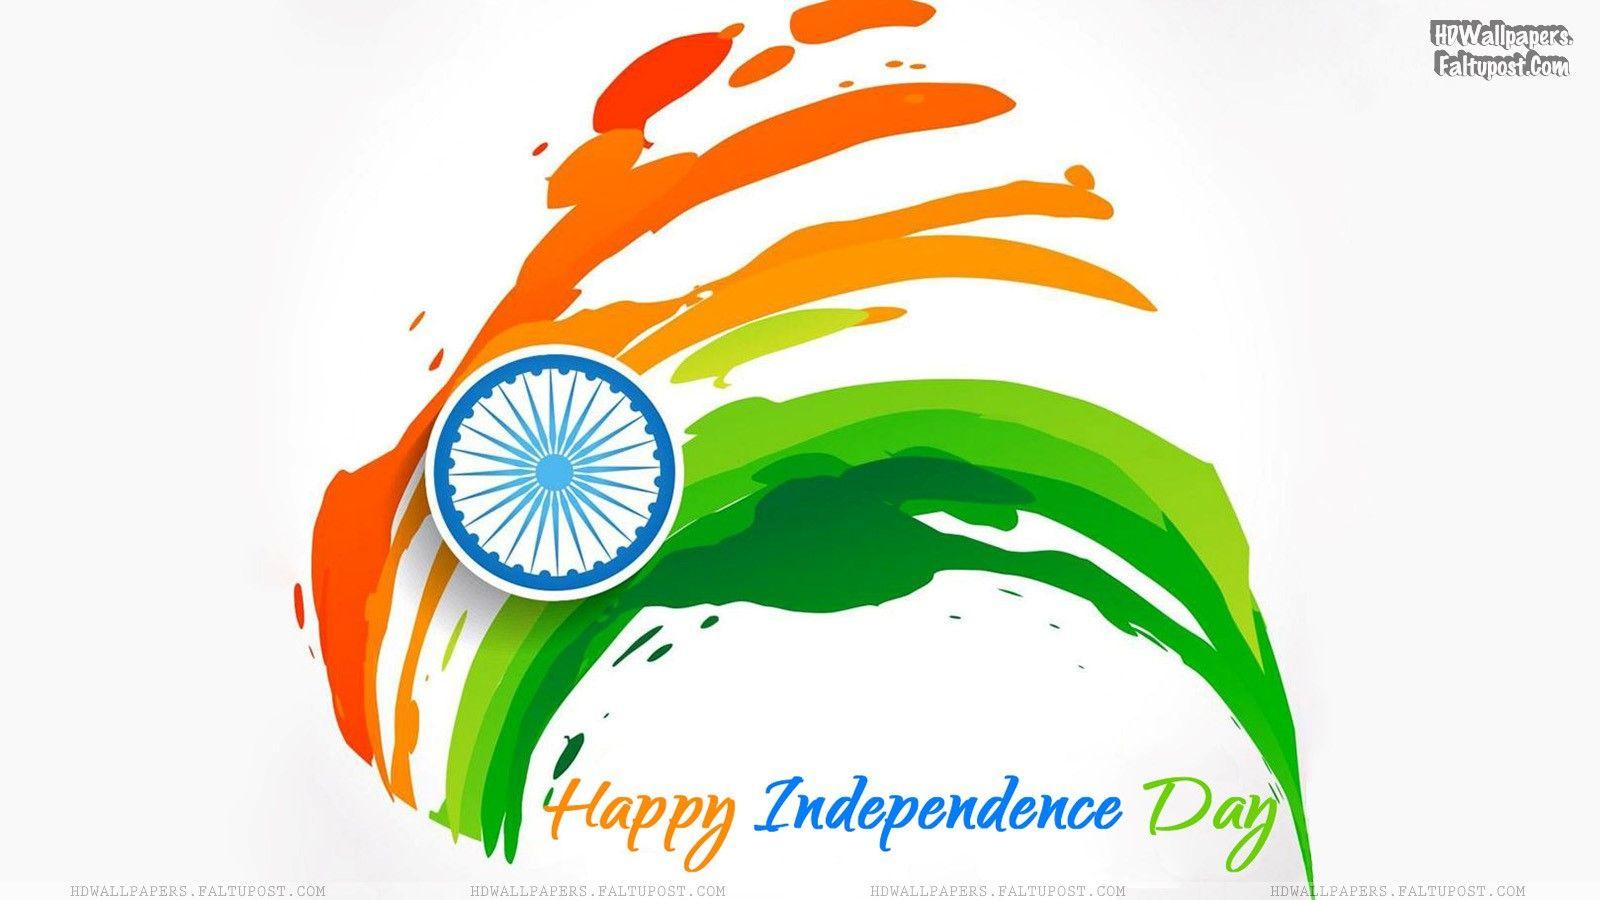 Independence Day India 2015 Wallpapers - Wallpaper Cave